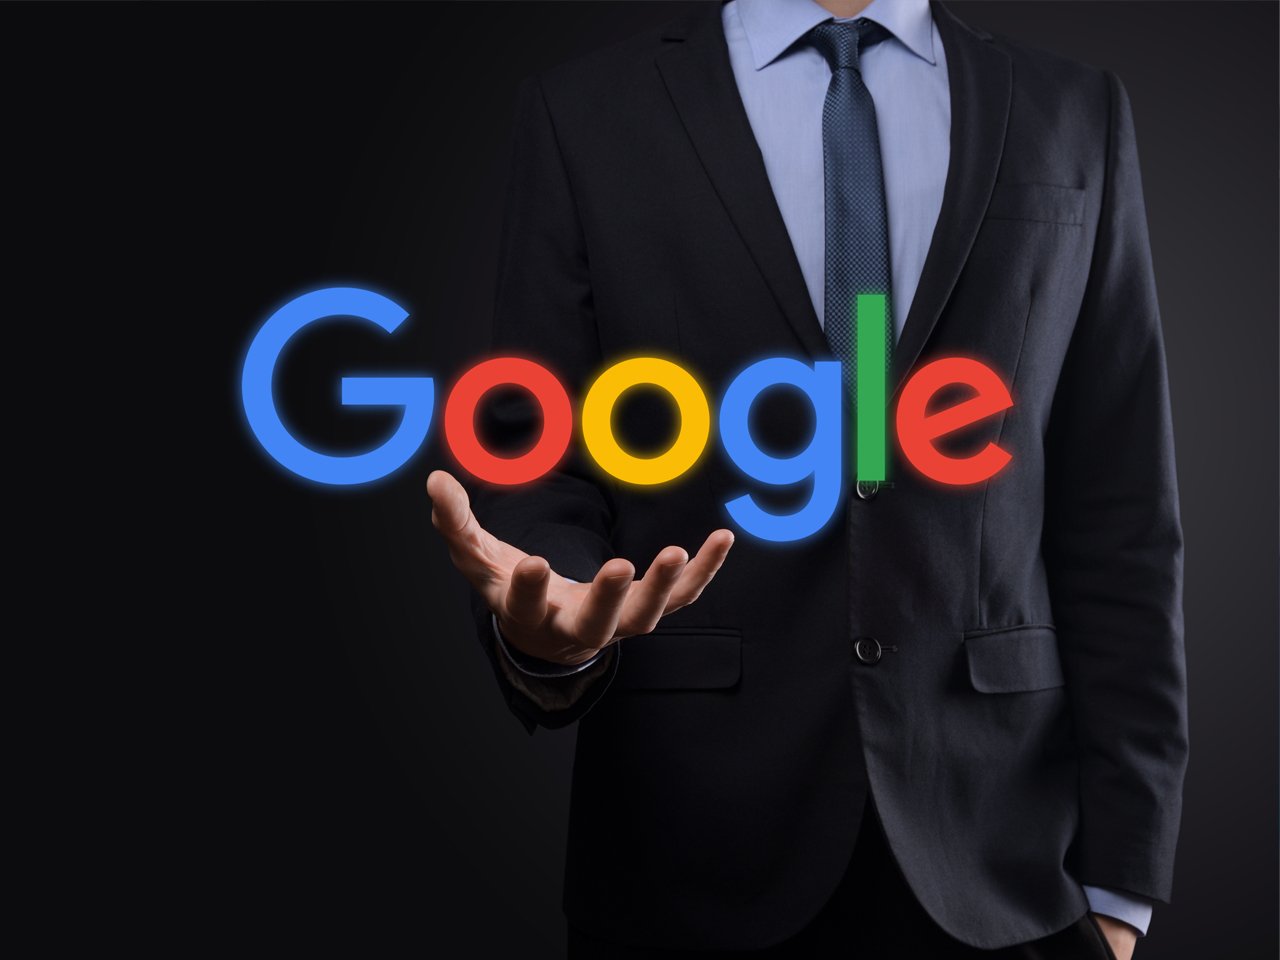 TT&A advised Match Group in its complaint against Google for anti-competitive conduct